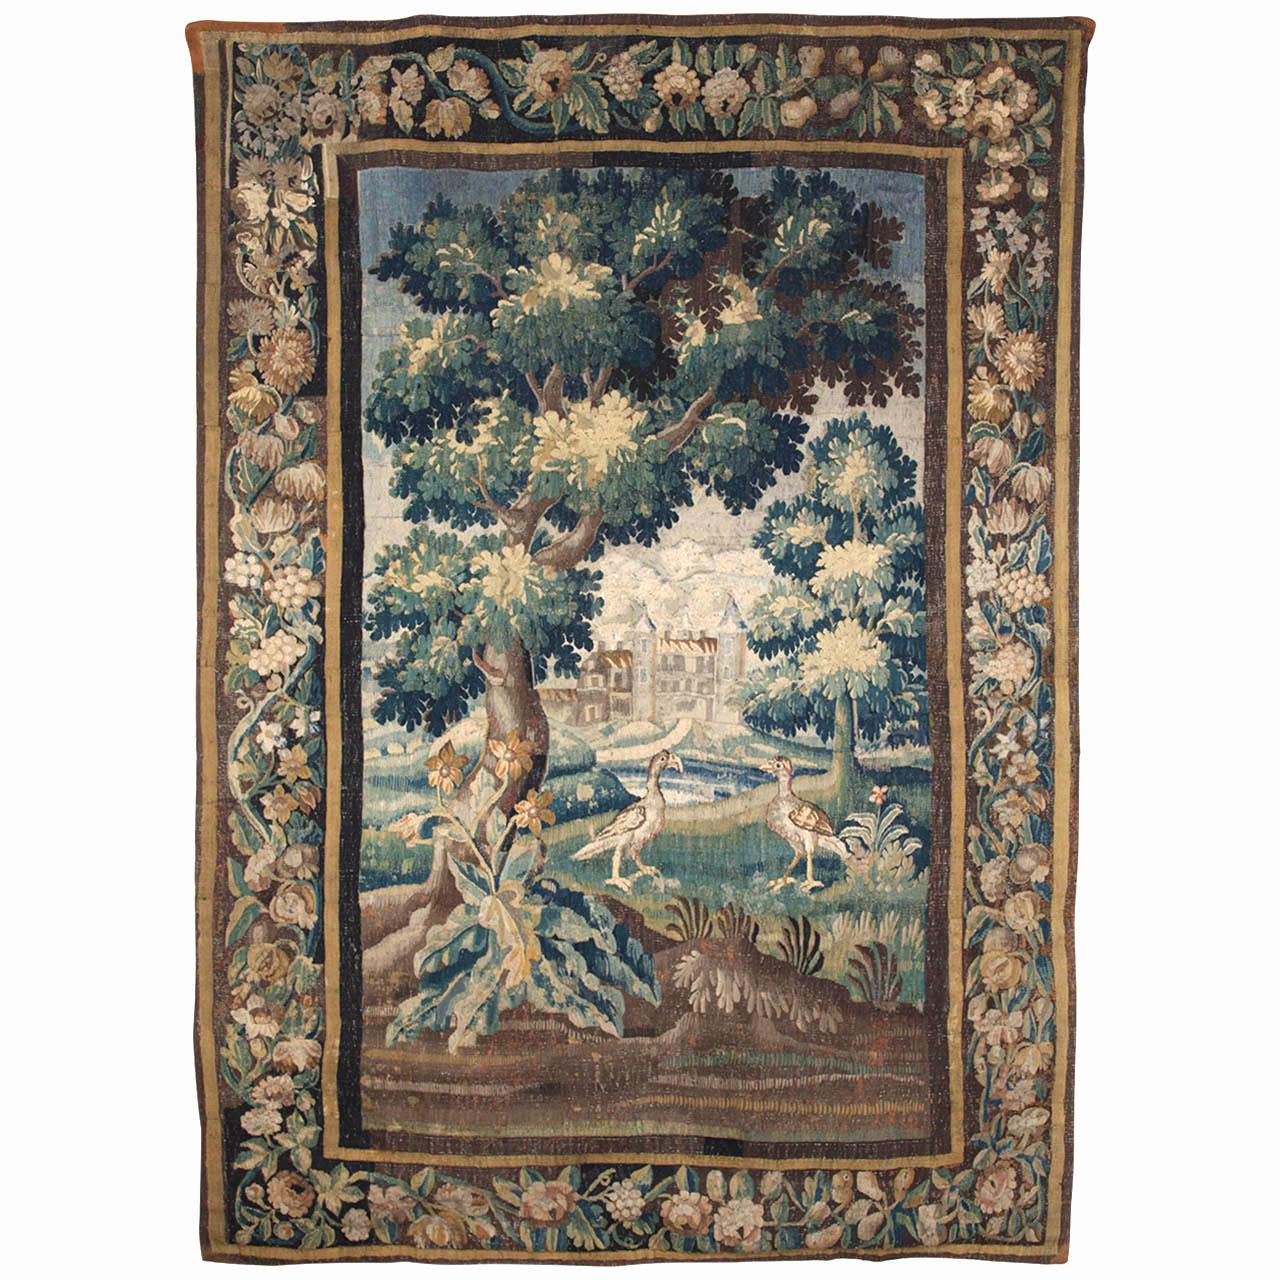 A fine Louis XIV verdure tapestry, Aubusson woven with a wooded river landscape with view of neighboring chateaux, in good four-side floral border.
Measure: cm 200 x 300.
France, second half of the 17th century.